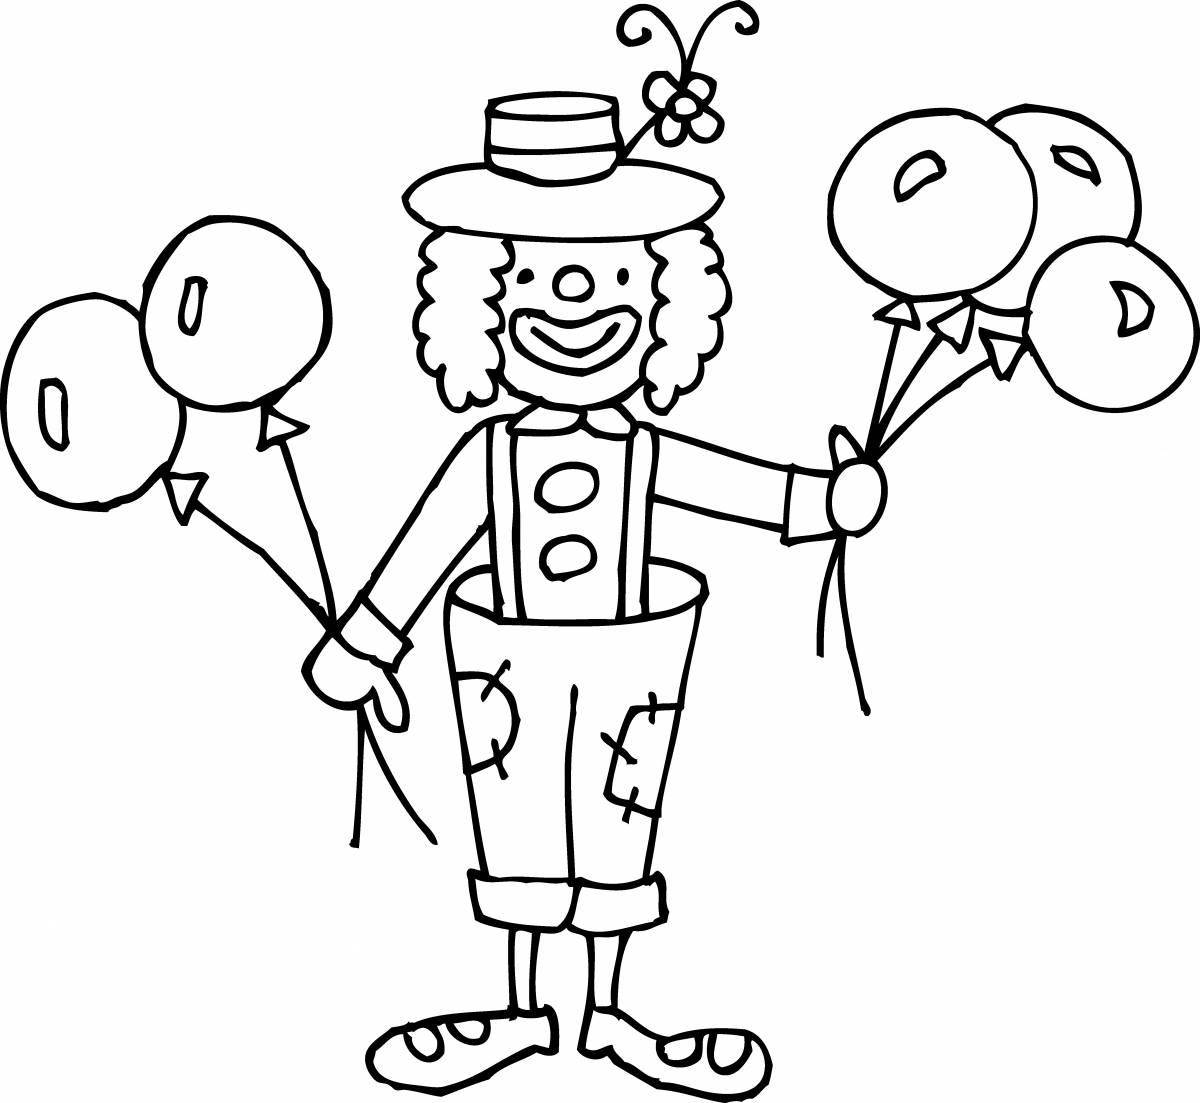 Smiling clown with balloons